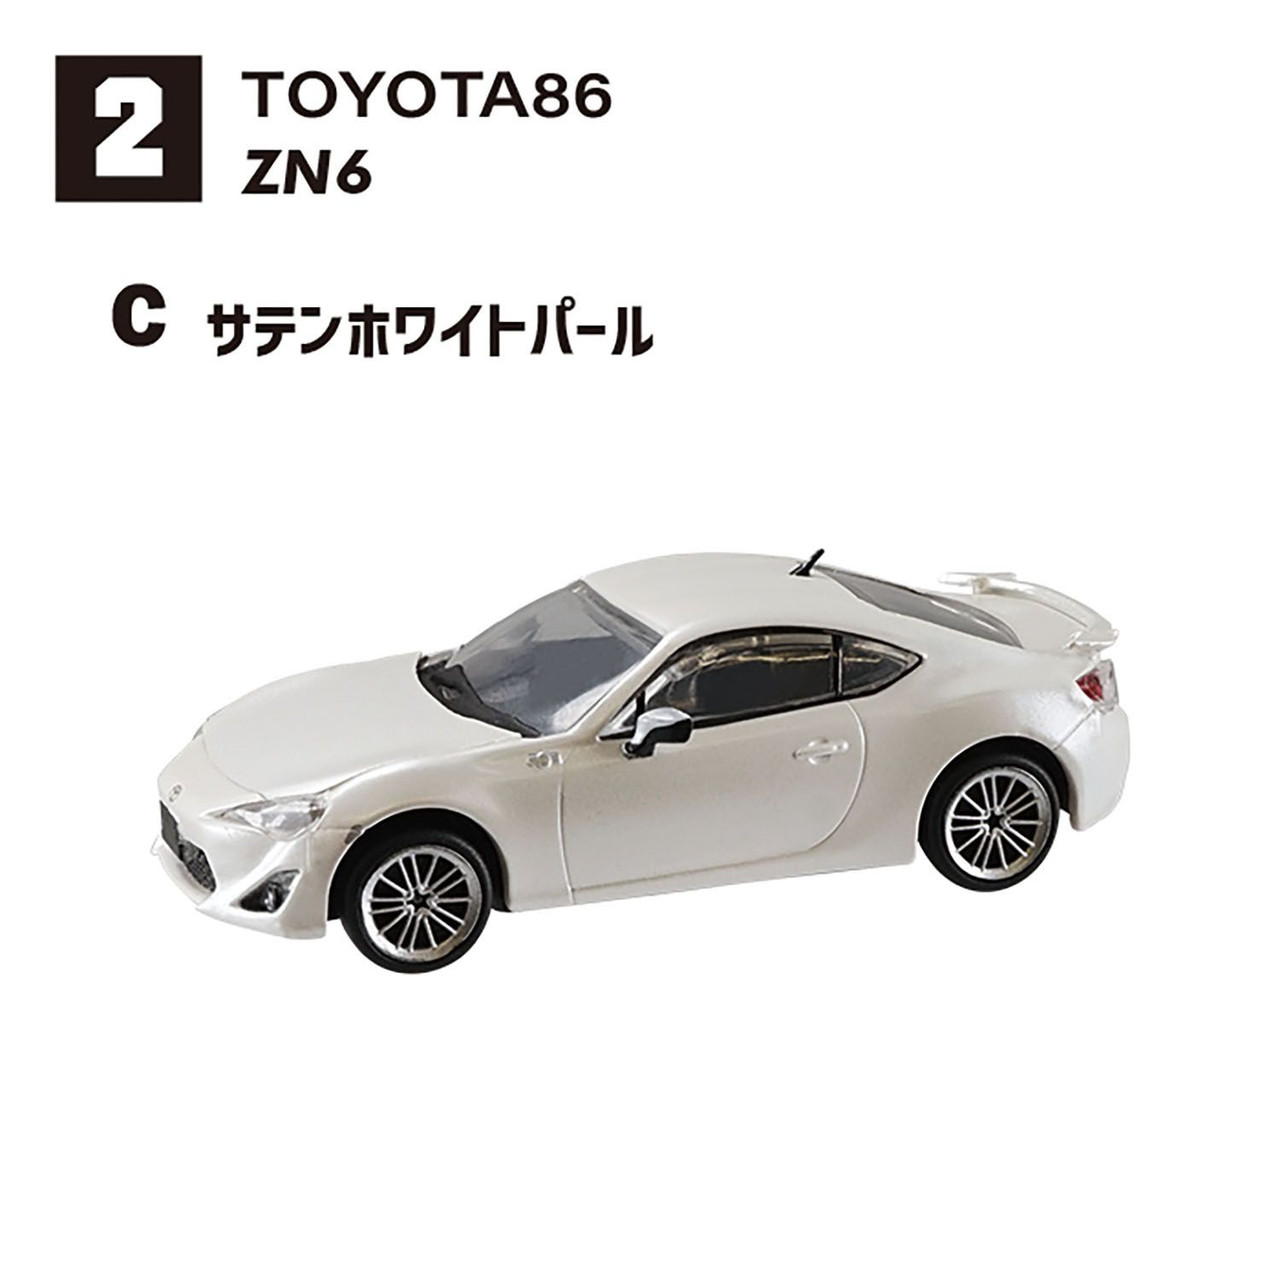 Japanese Classic Cars Vol.15 -86 Collection- Plastic Miniature 